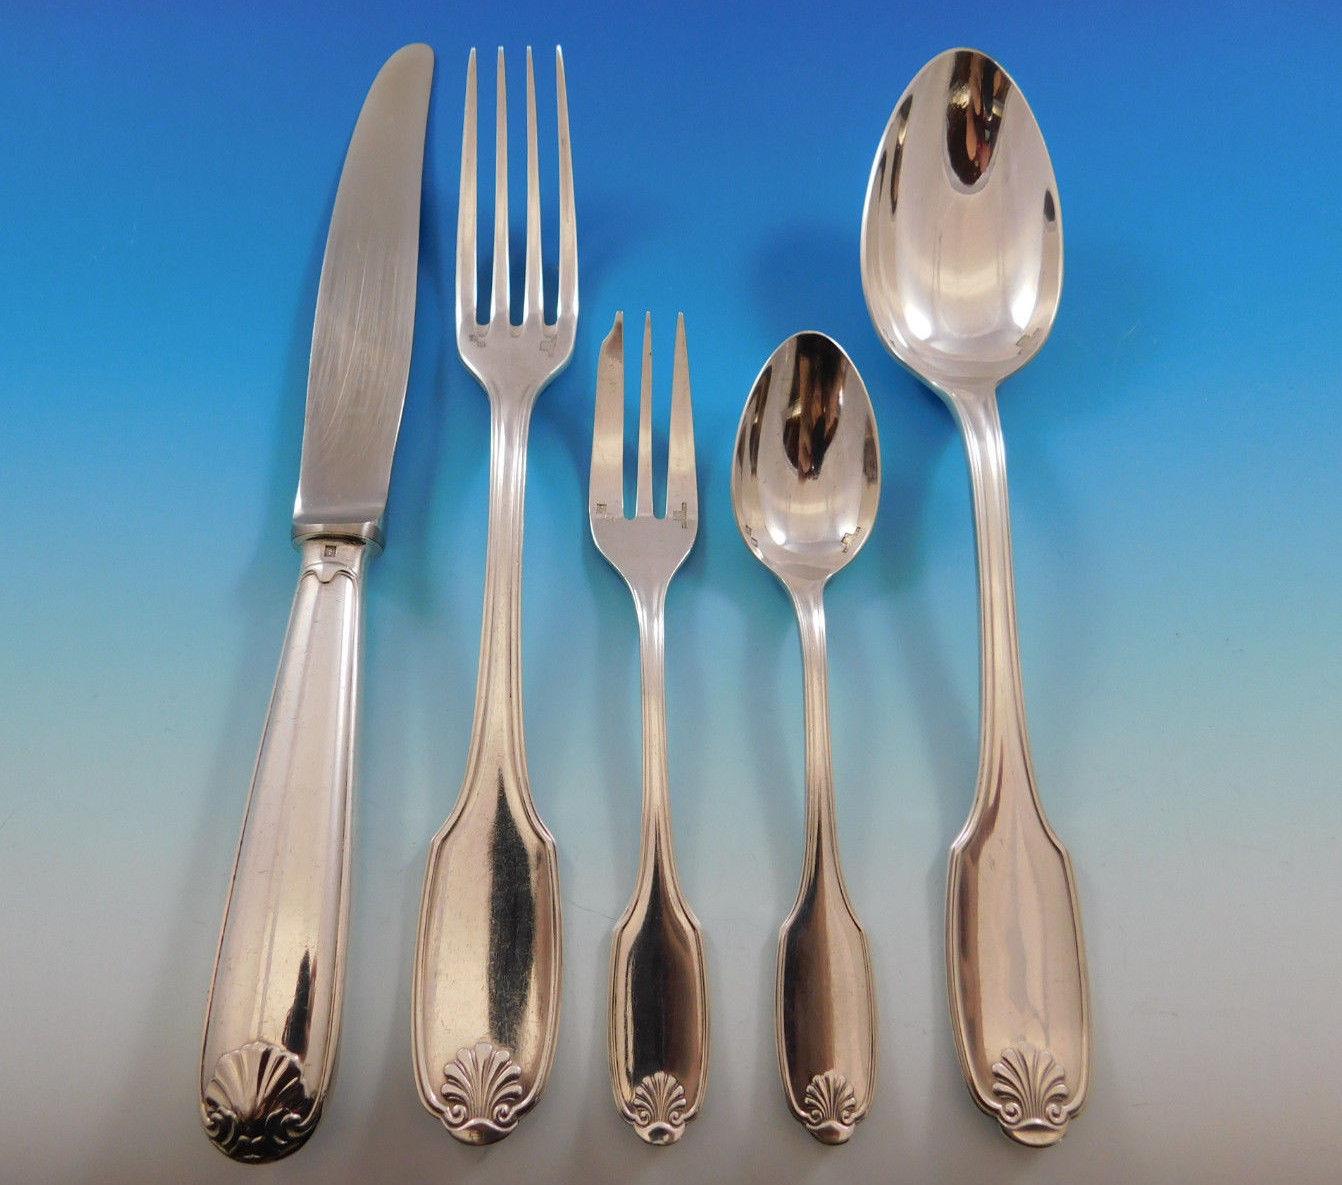 Outstanding dinner size Vendome AKA Arcantia by Christofle France silver plated flatware set, 60 pieces. This pattern features the same shell motif that adorned the ceremonial silverware used during the reign of King Louis XIV. This set